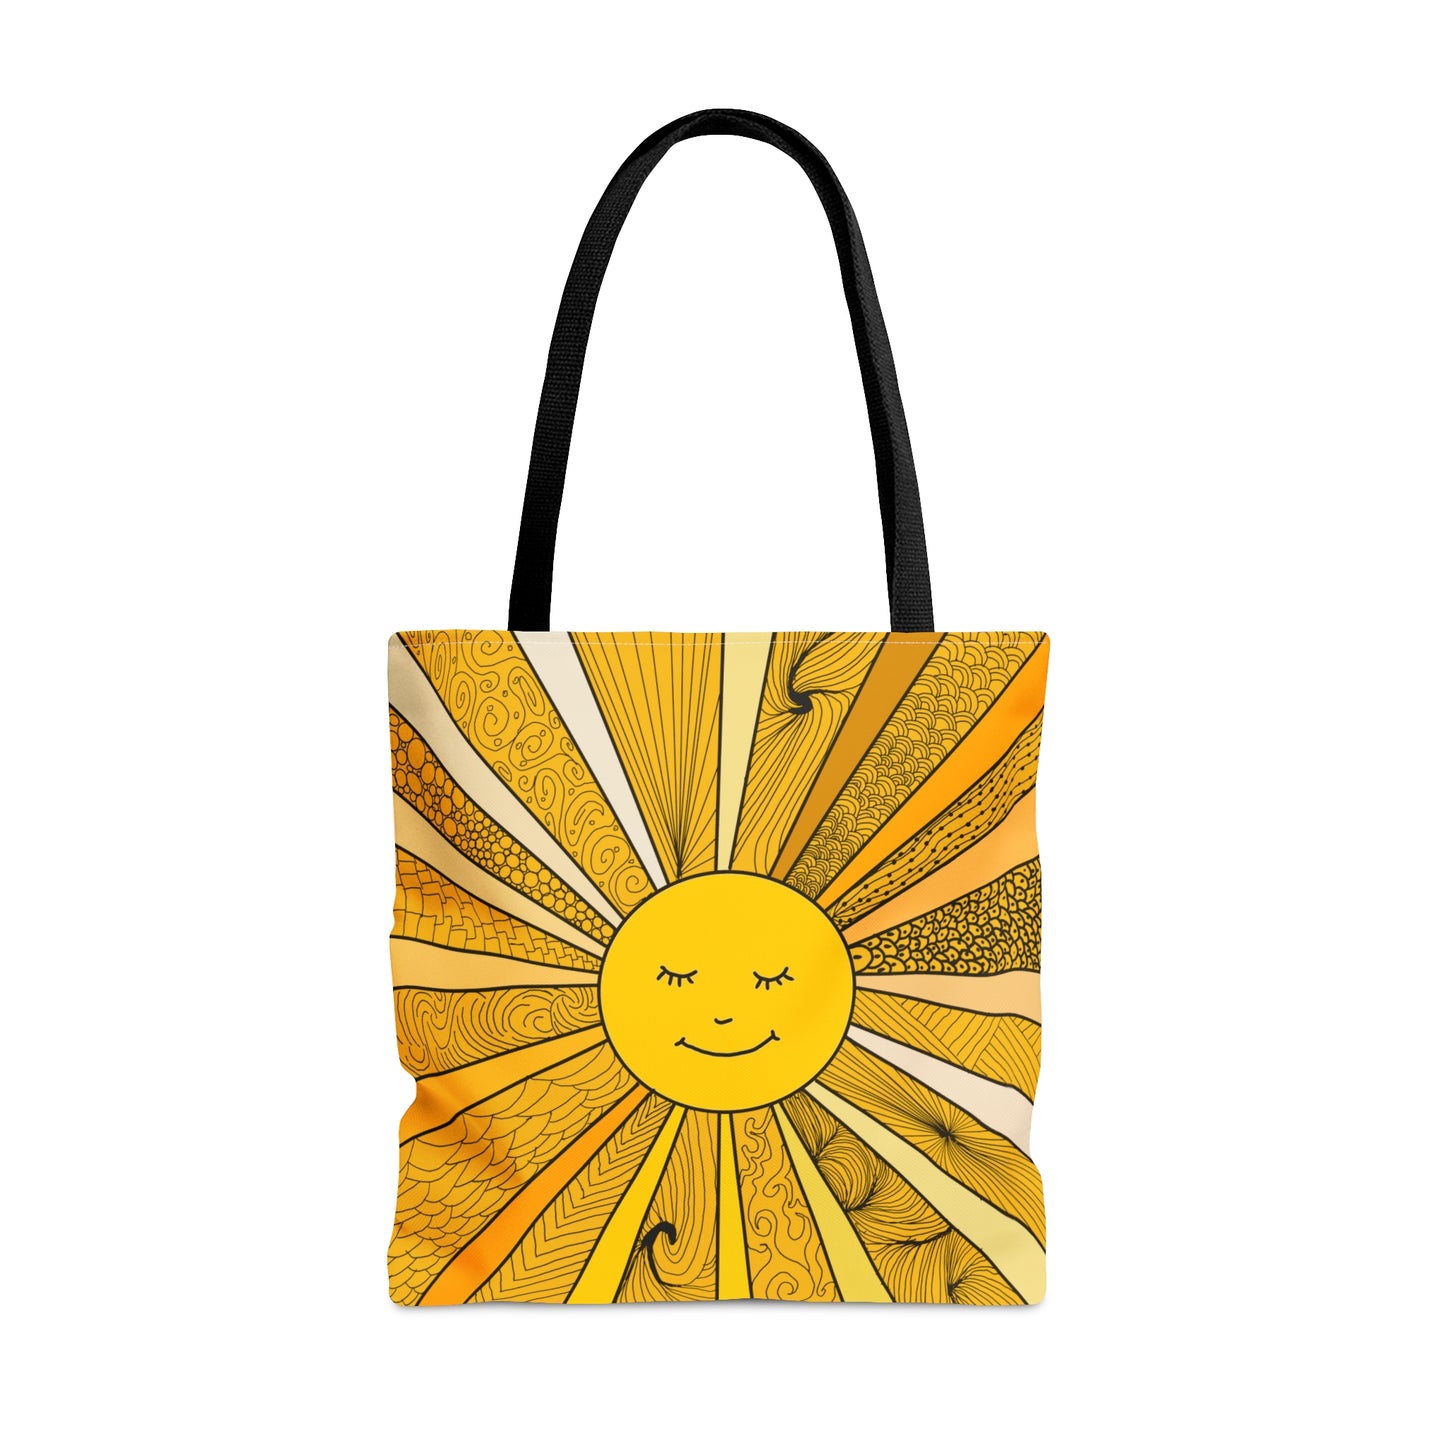 Sunny Days are Coming! Tote Bag